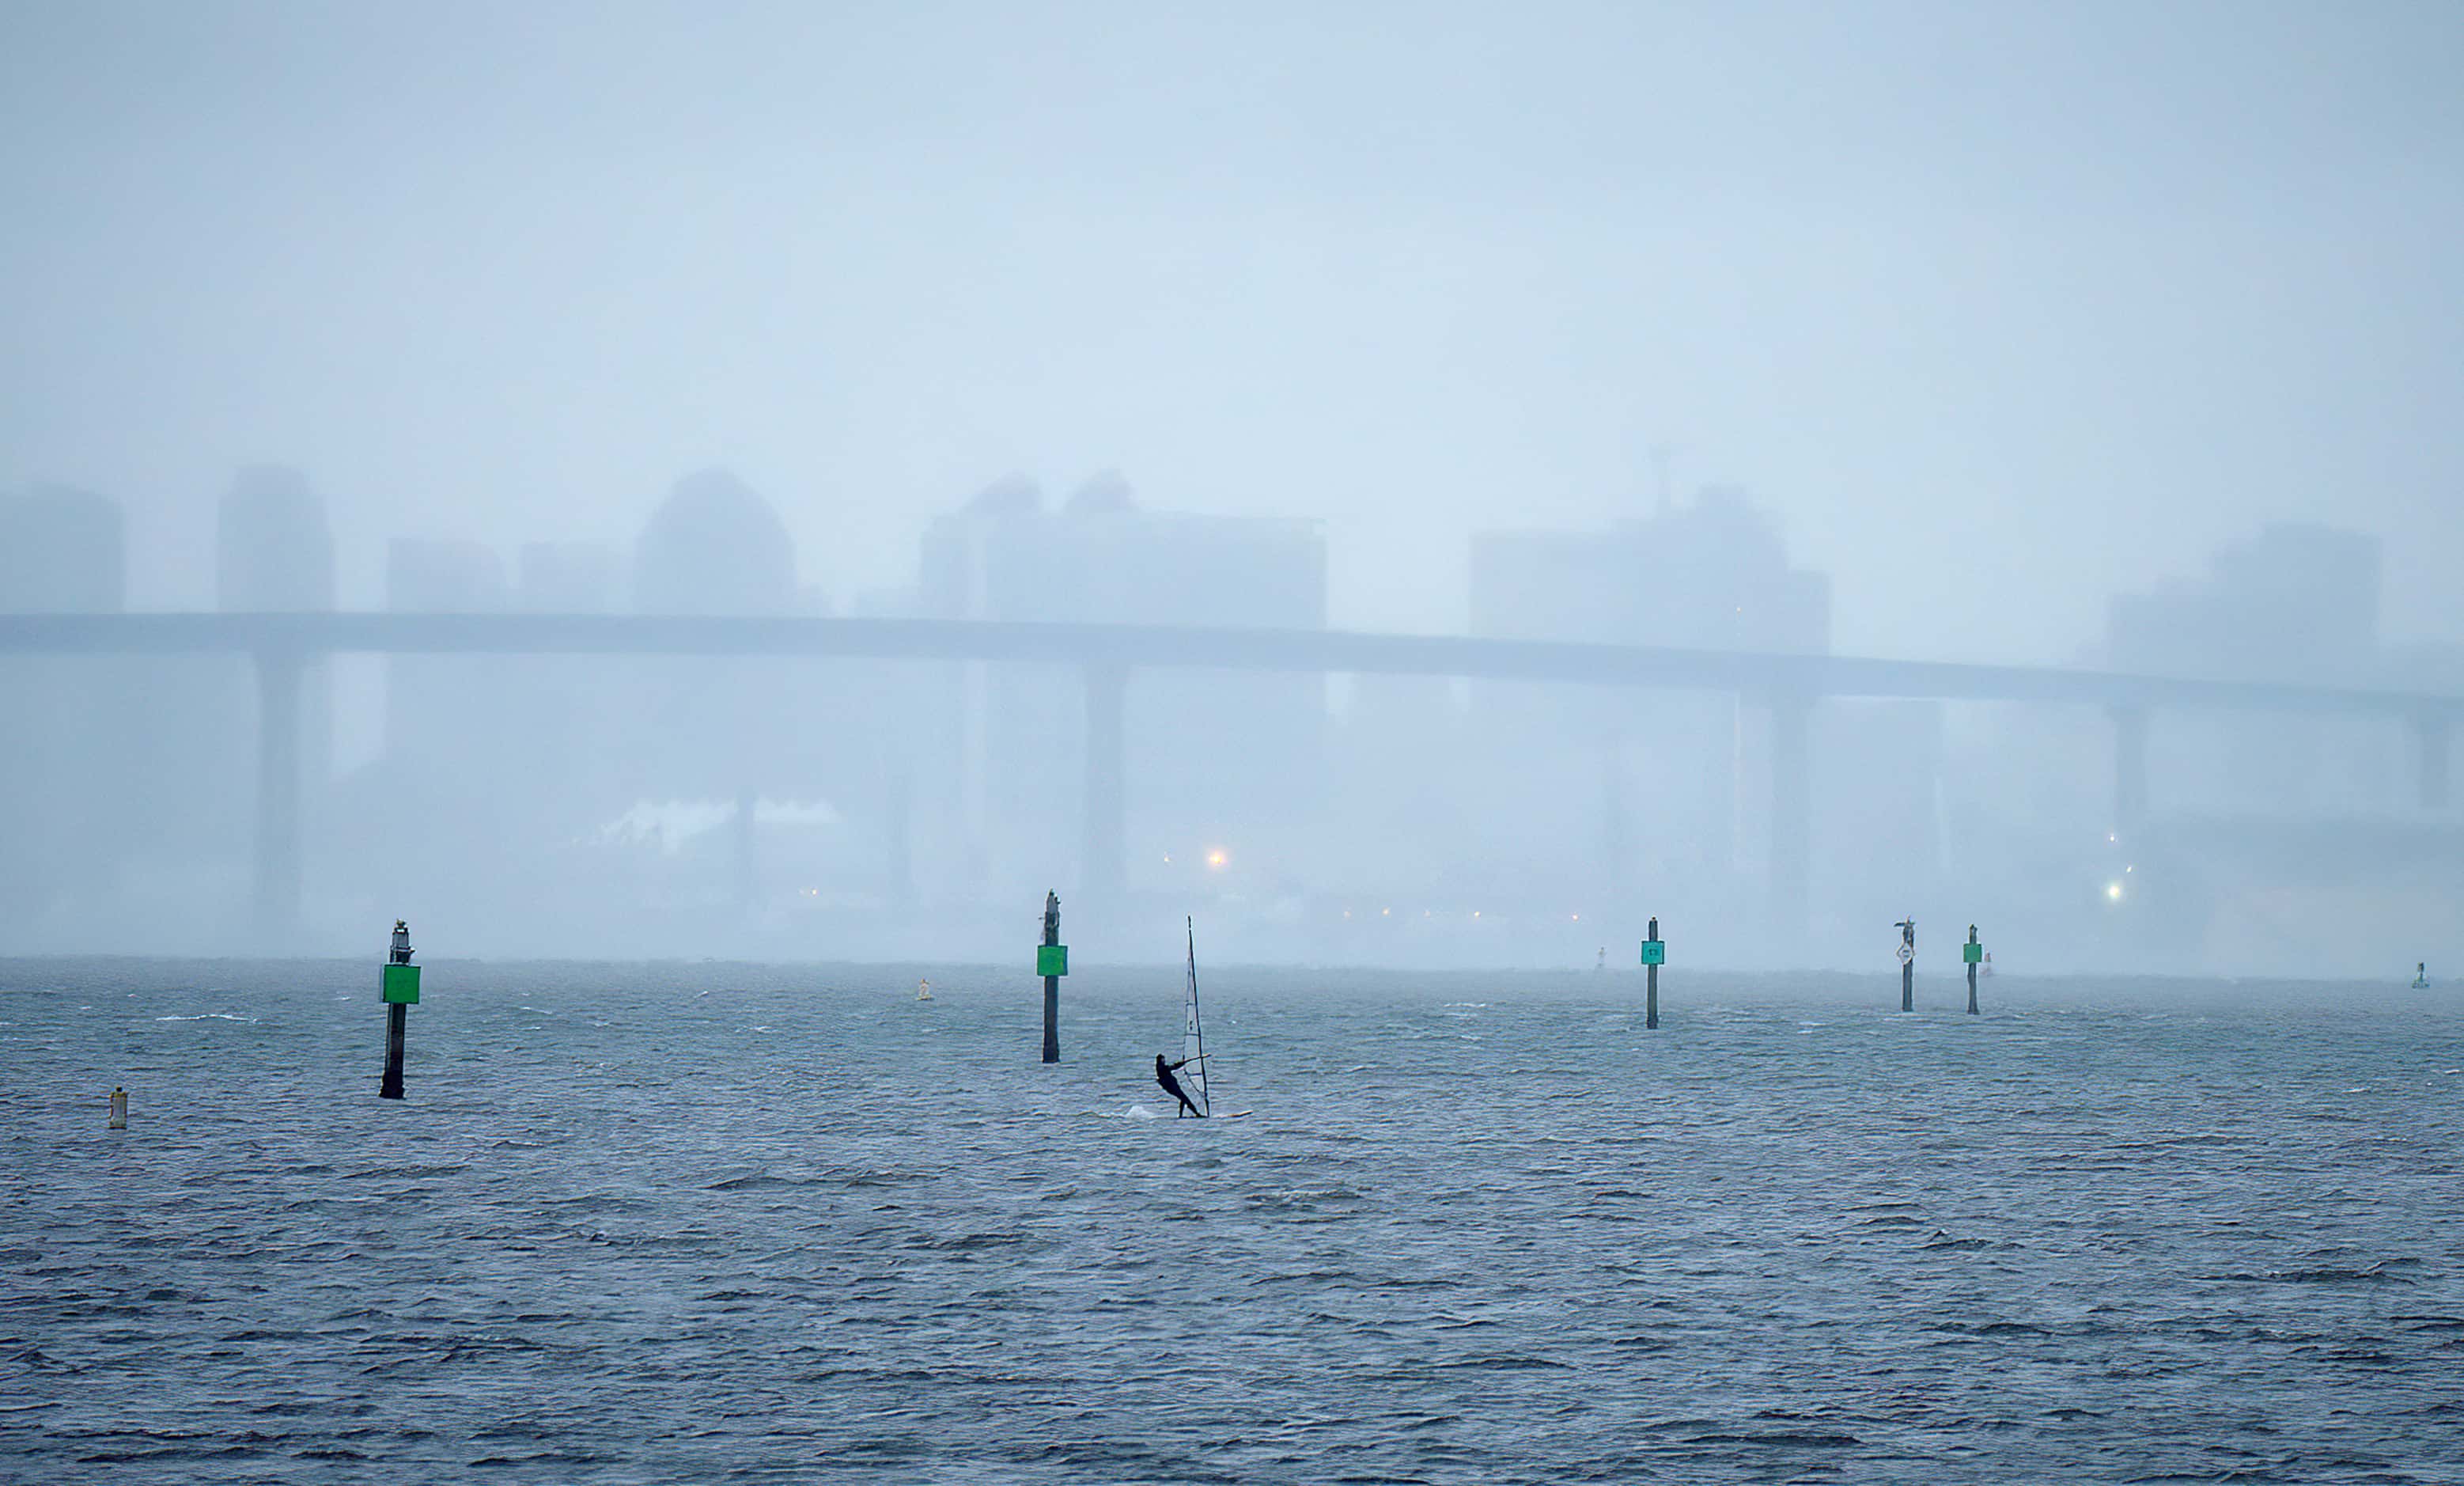 A lone windsurfer, backdropped by the San Diego skyline, takes advantage of the high winds...